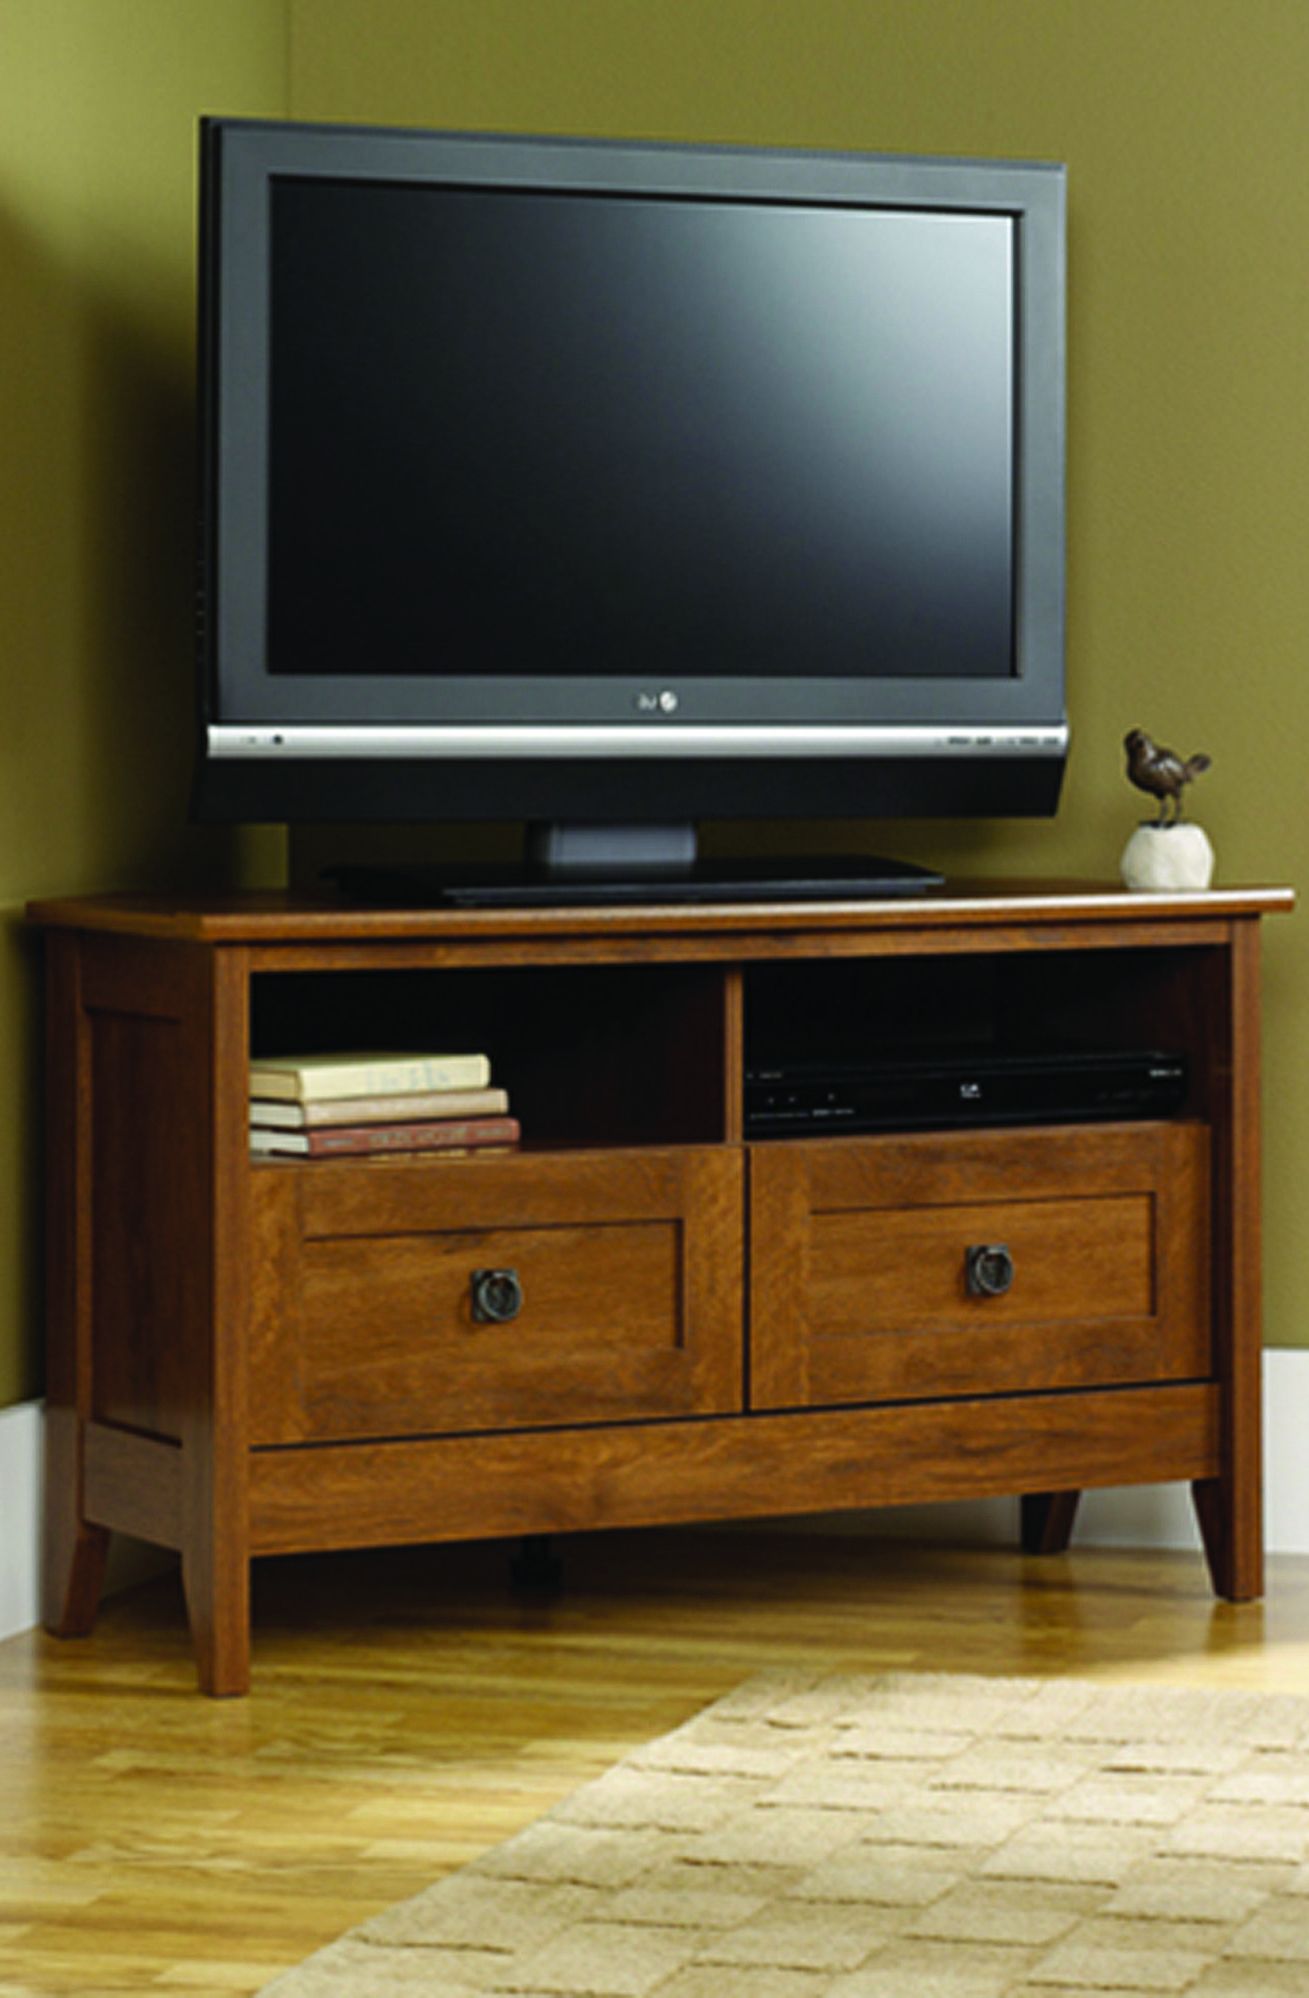 The August Hill Tv Stand Meets All Your Entertaining Needs Intended For Famous Simple Open Storage Shelf Corner Tv Stands (Photo 1 of 10)